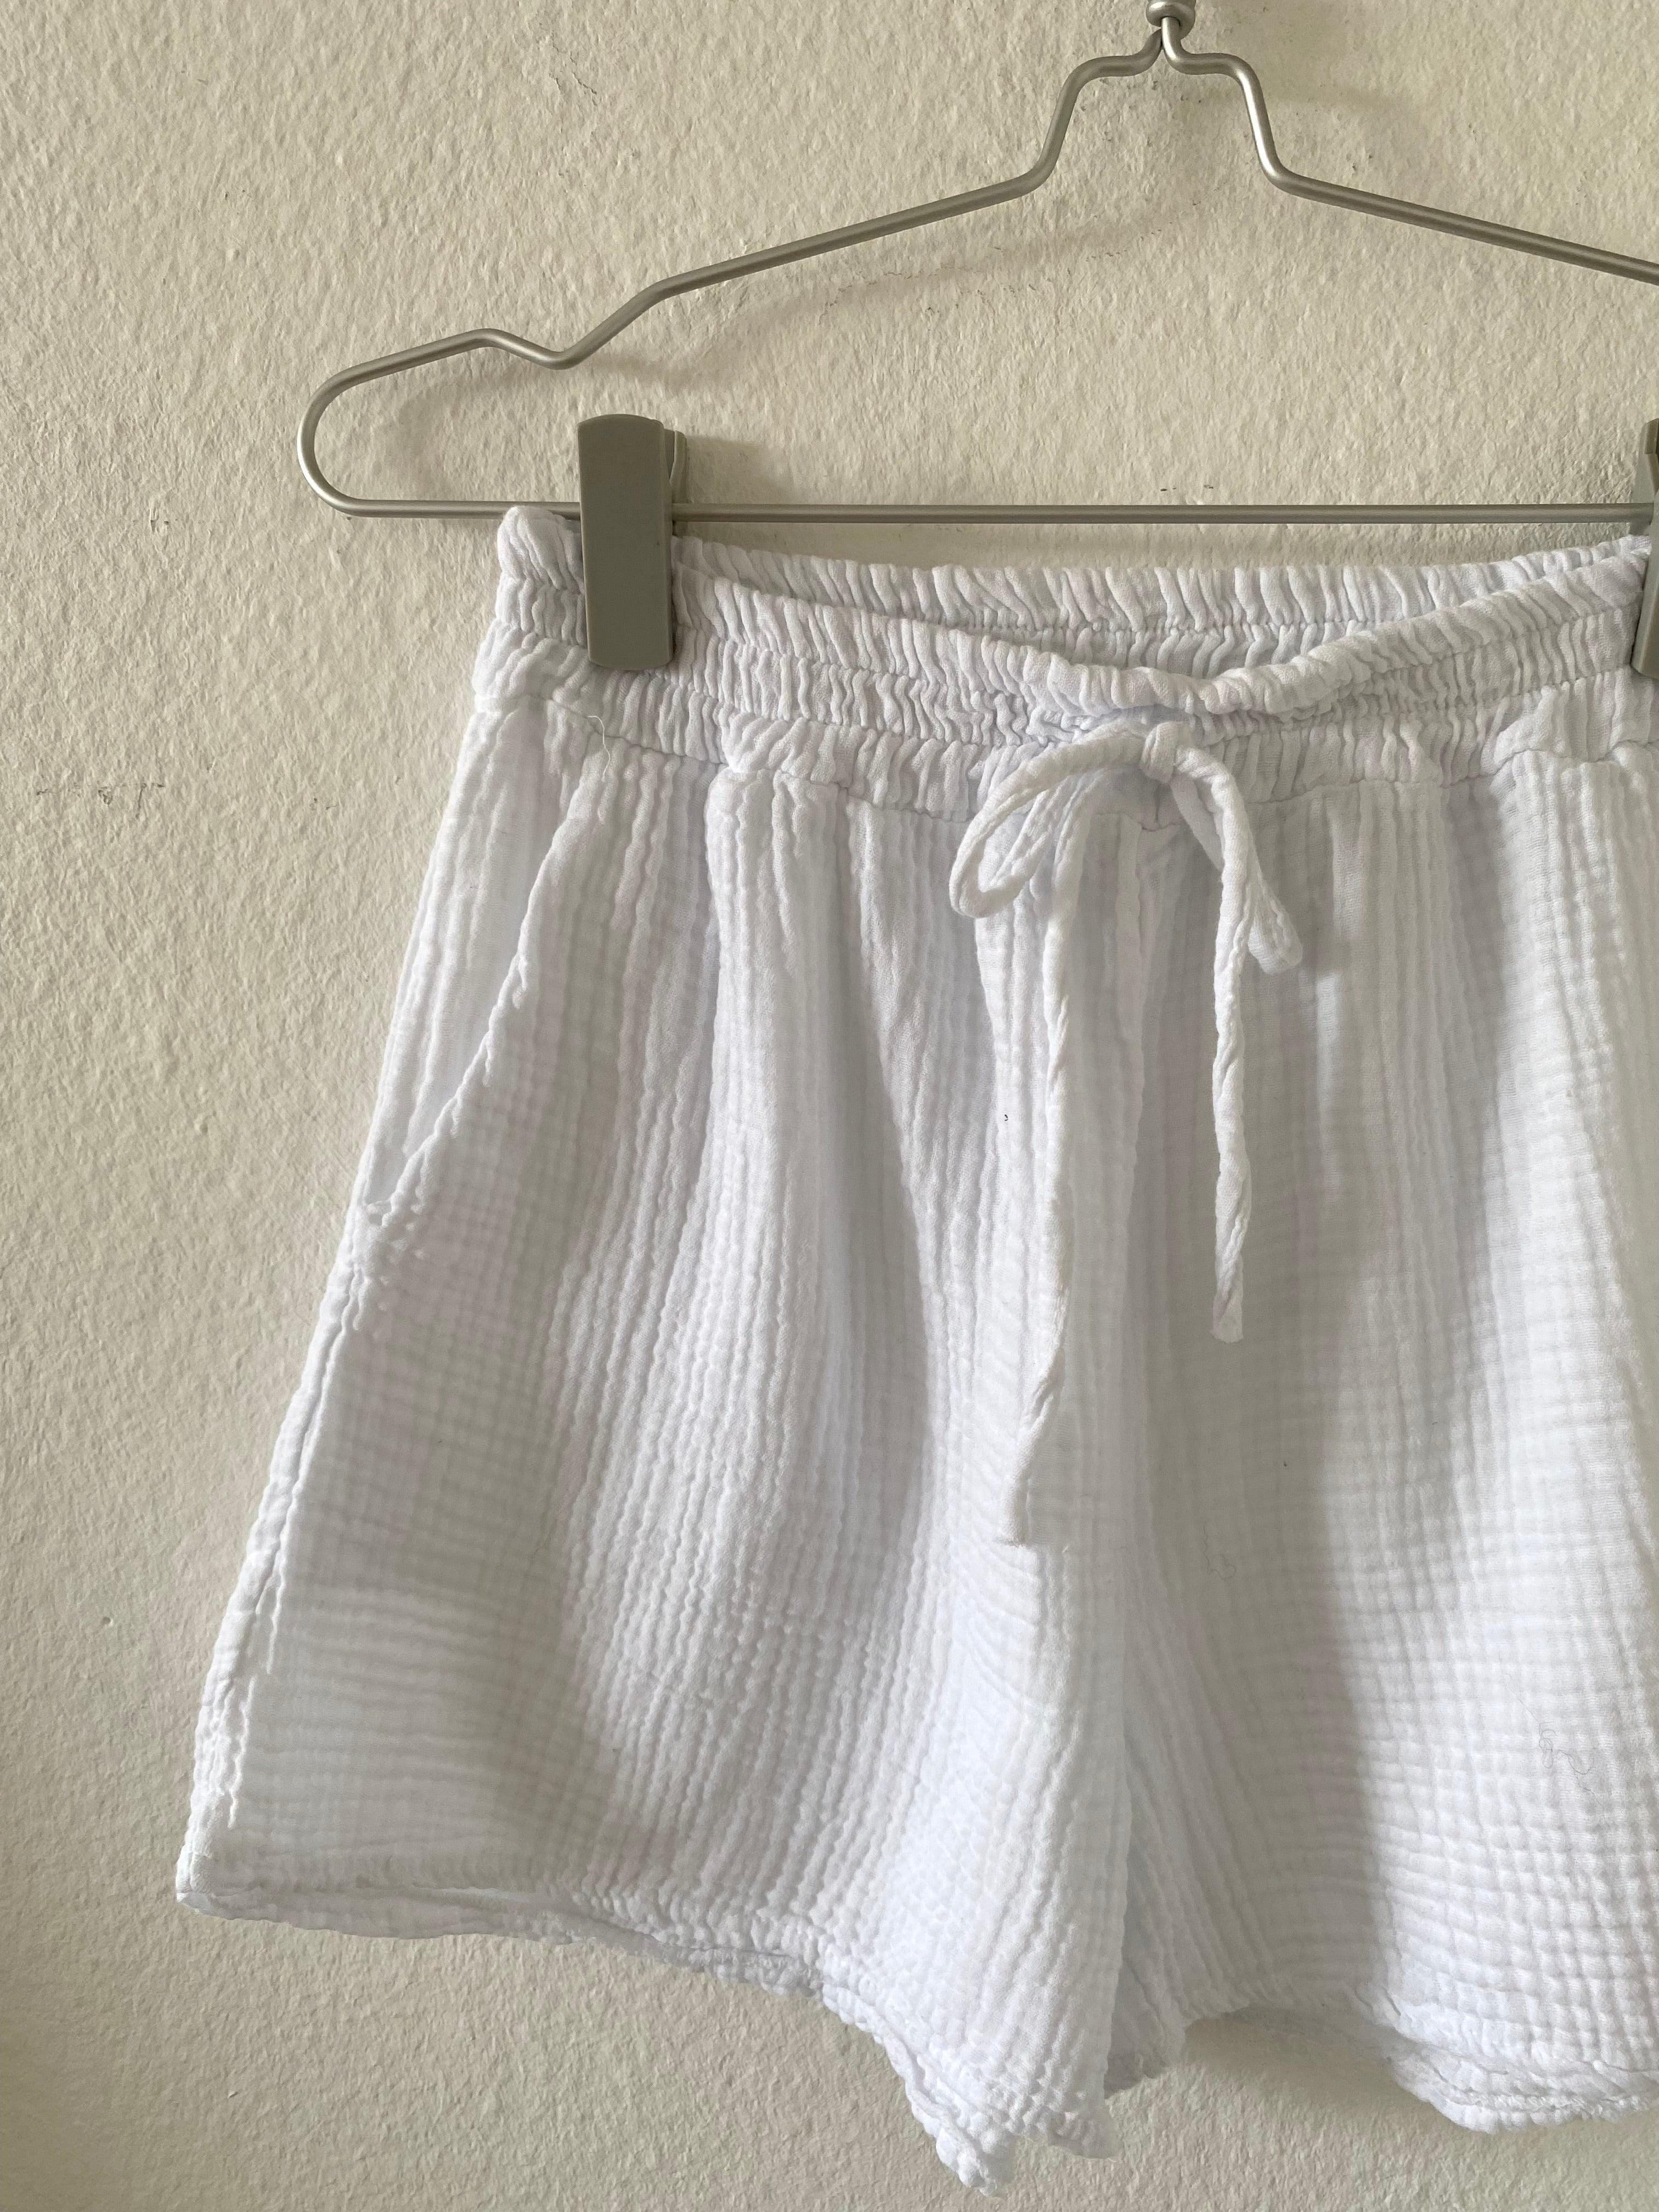 Musselin Shorts - White